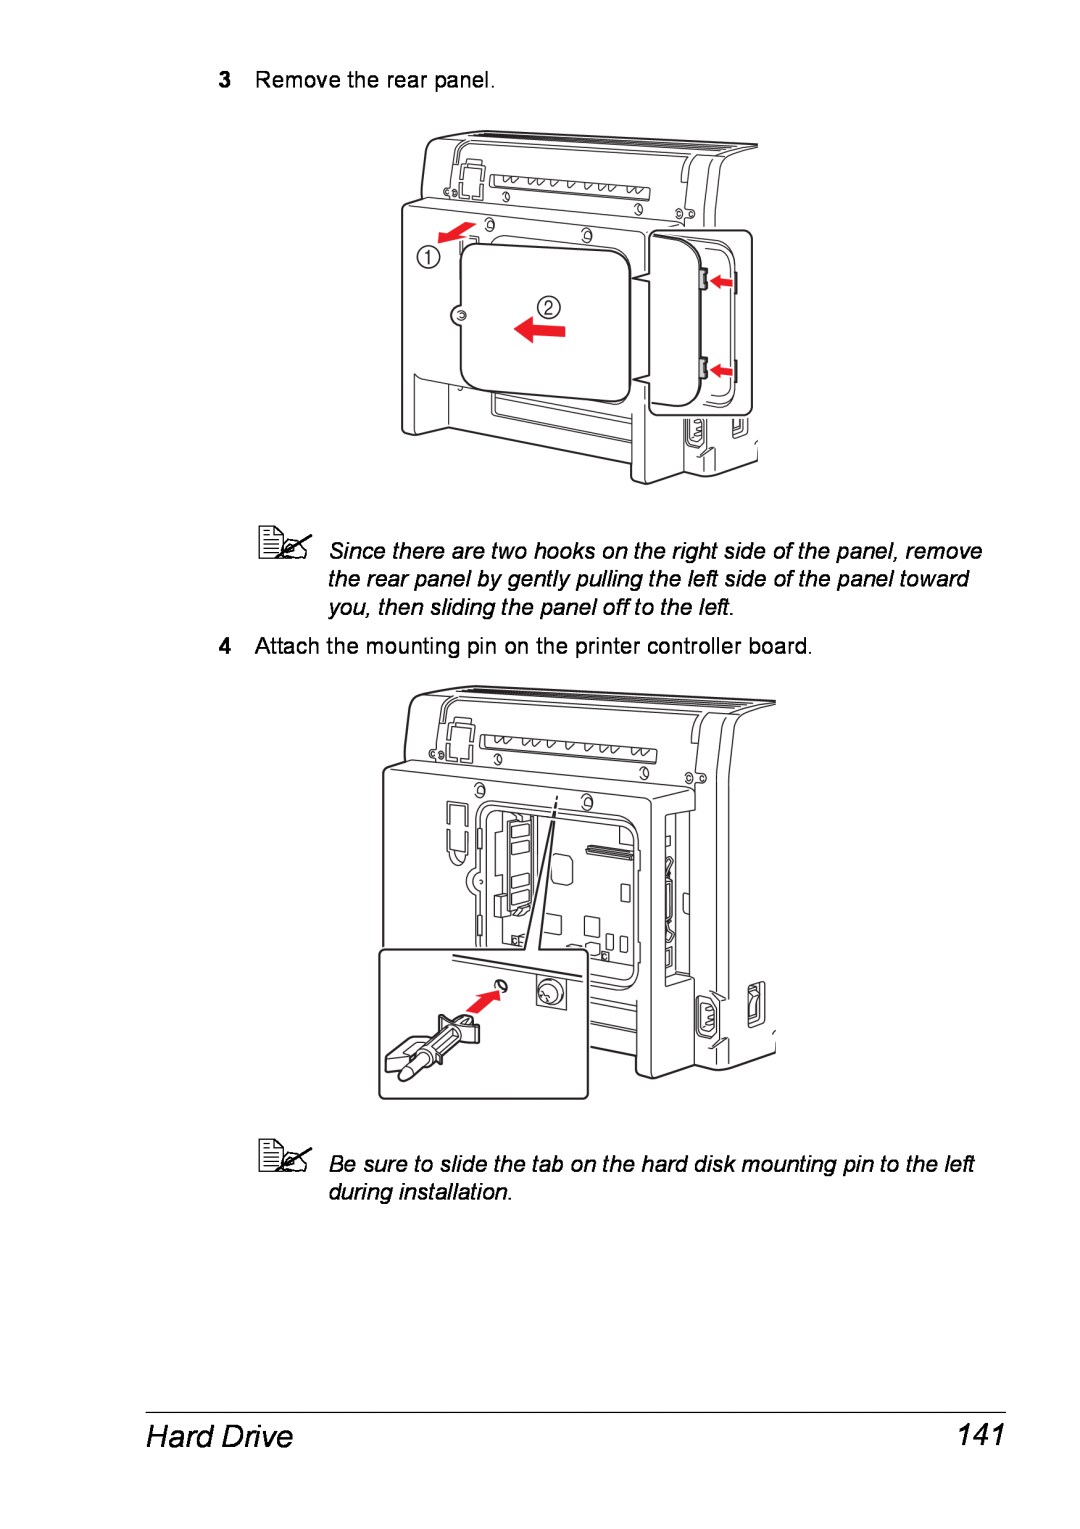 Xerox 6120 manual Hard Drive, Remove the rear panel, Attach the mounting pin on the printer controller board 